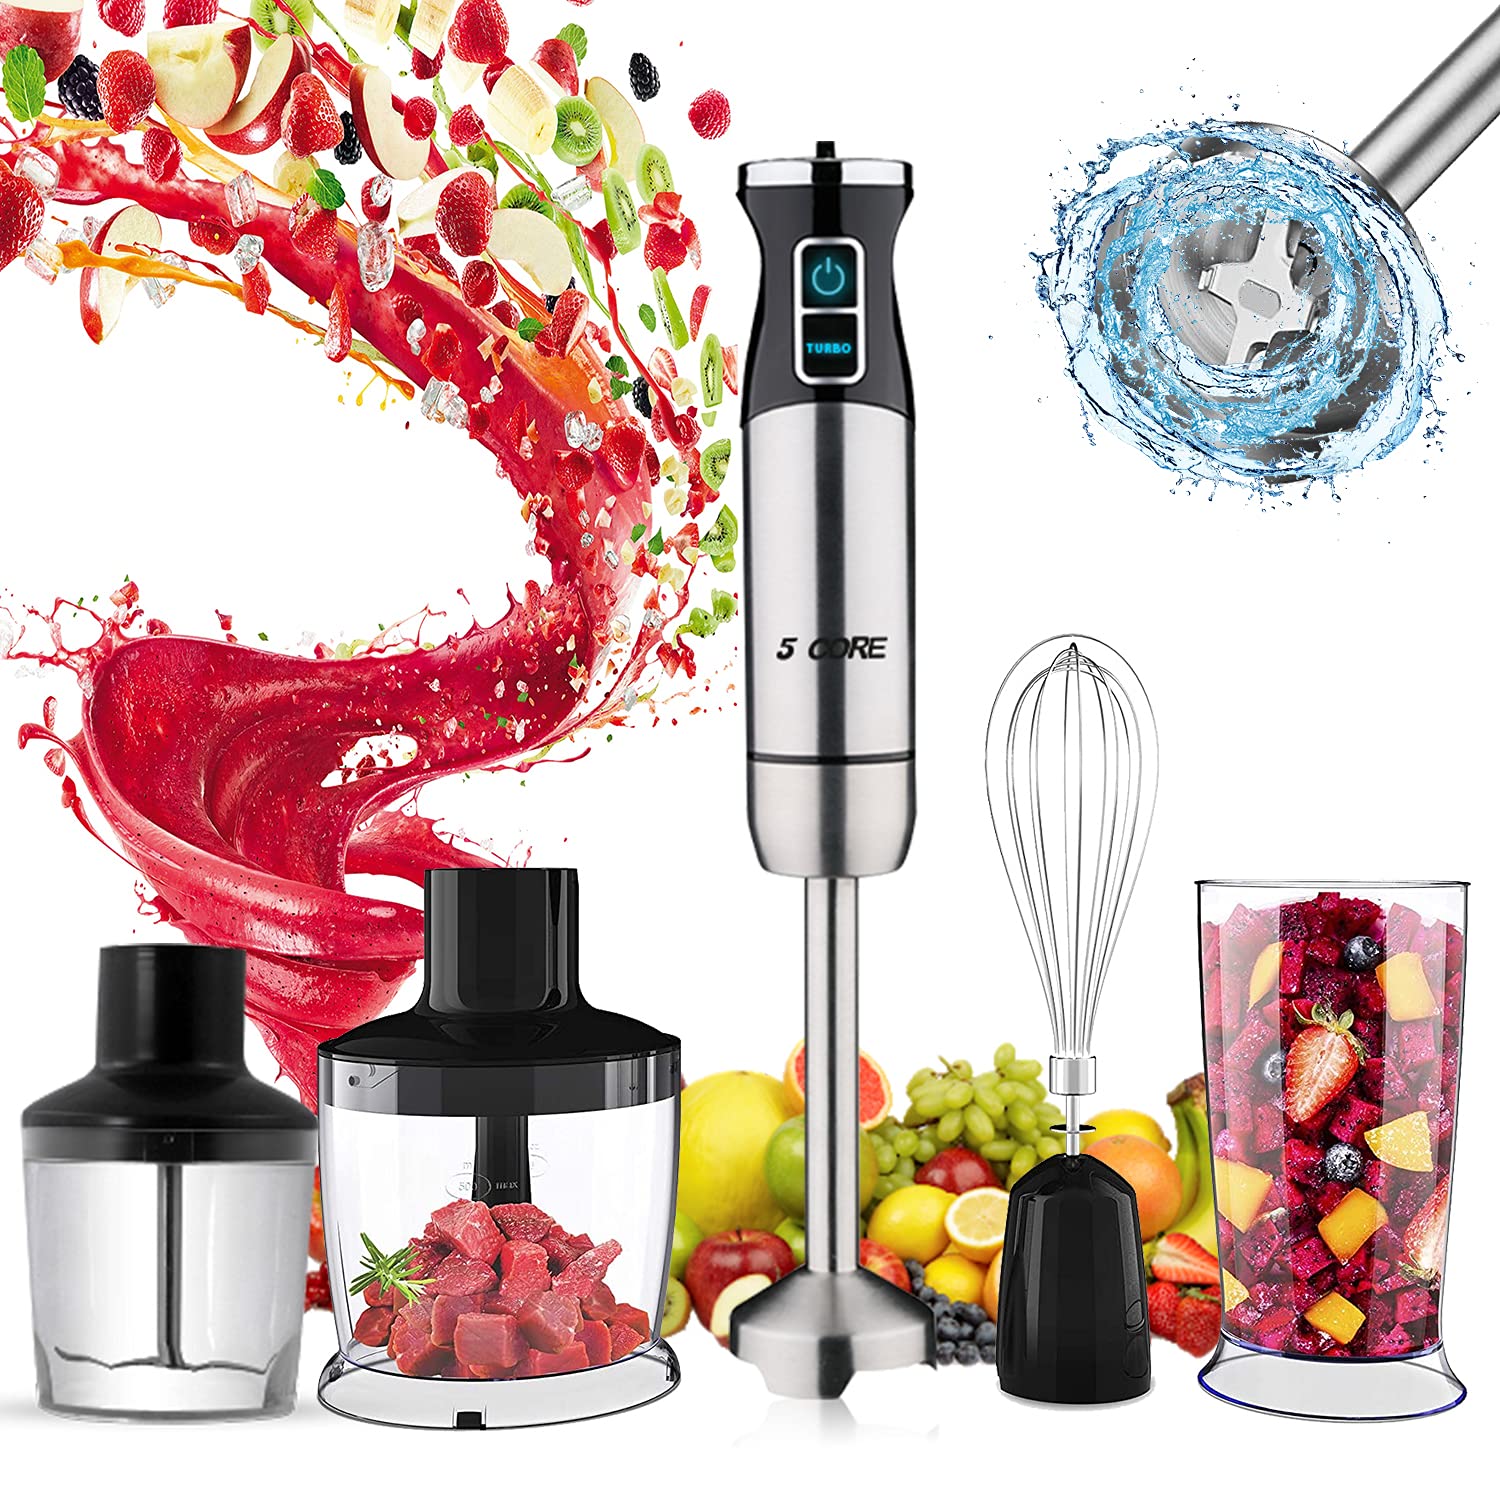 5 Core 5-in-1 Immersion Hand Blender, Powerful 500W Motor, 8 Speed Settings, BPA-Free Milk Frother, Smoothies, Egg Whisk, Puree Infant Food, Sauces & Soups